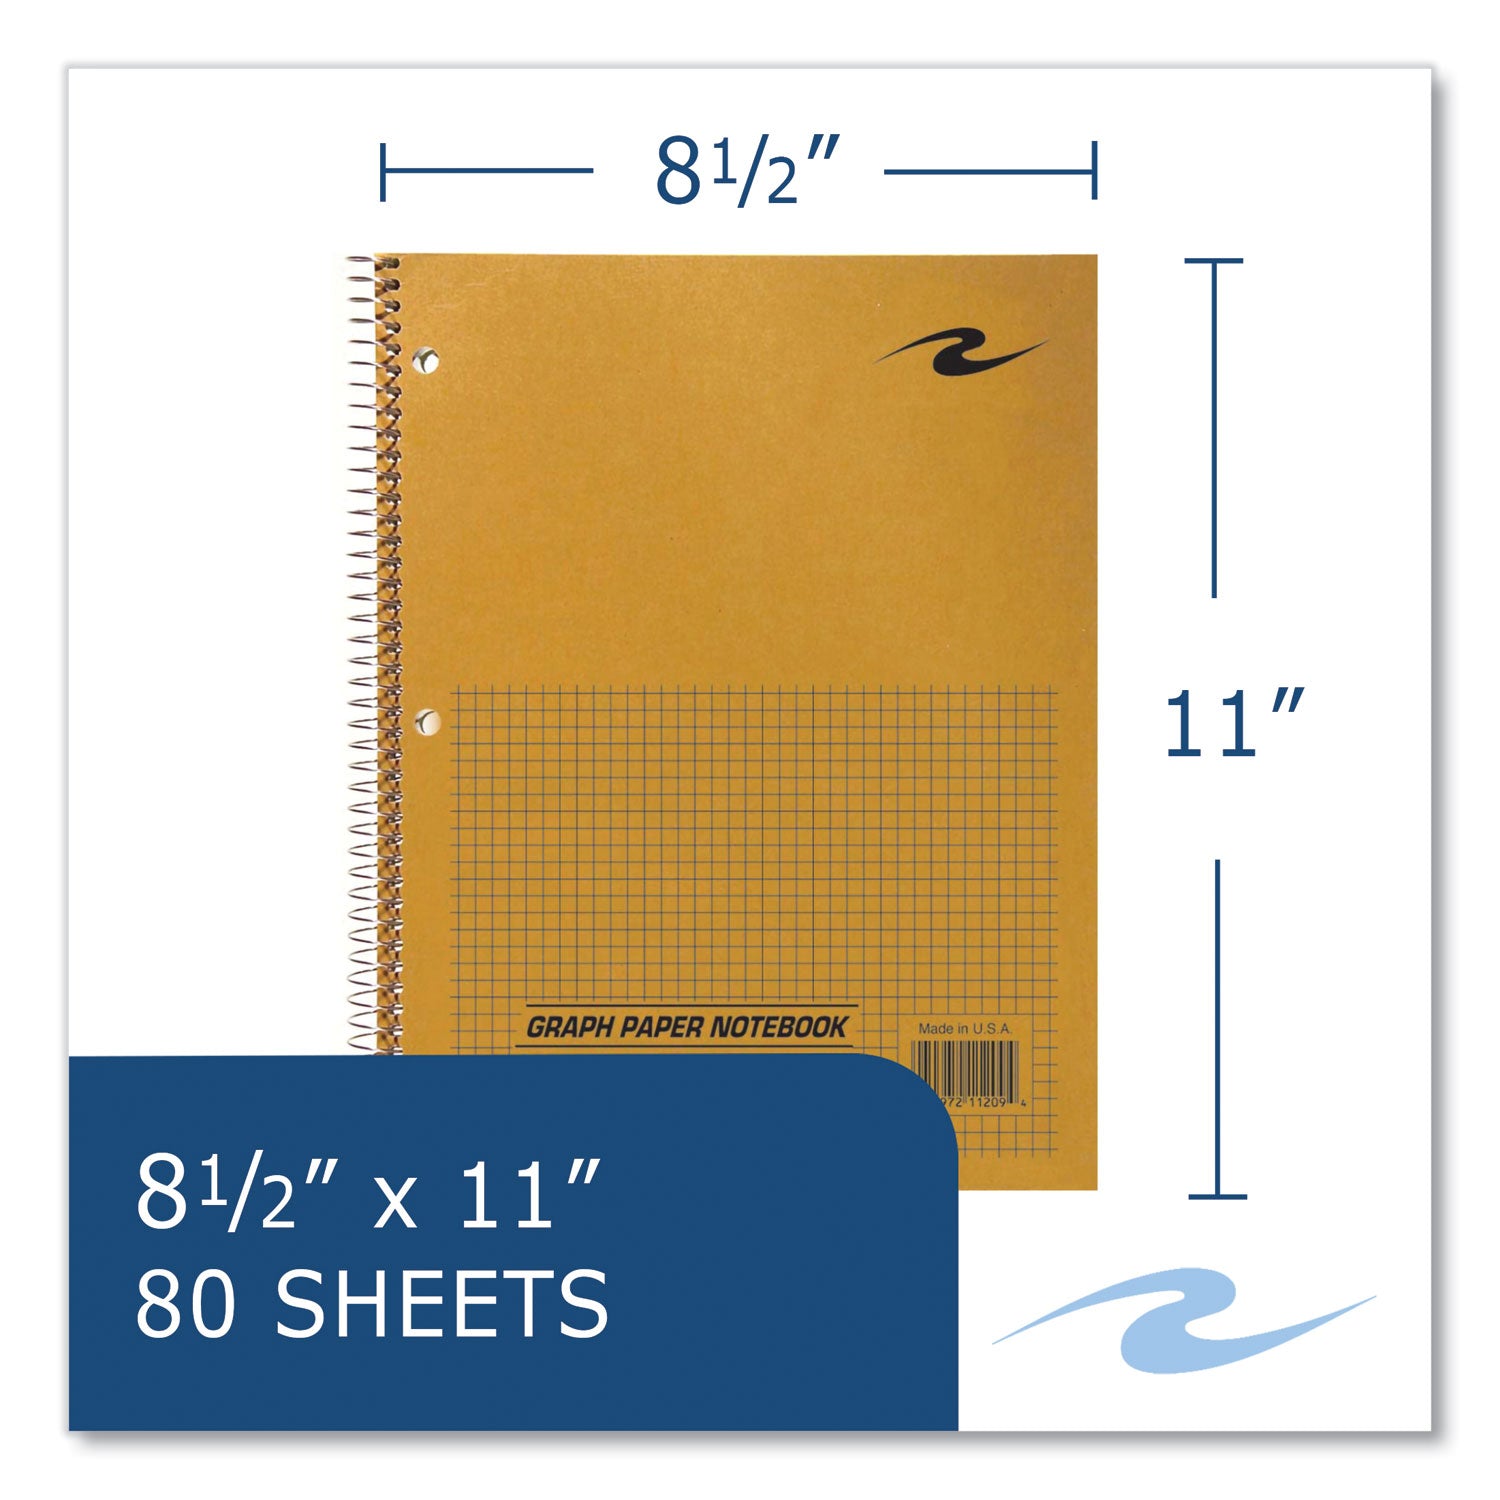 lab-and-science-wirebound-notebook-quadrille-rule-5-sq-in-brown-cover-80-85-x-11-sheets-24-ct-ships-in-4-6-bus-days_roa11209cs - 3